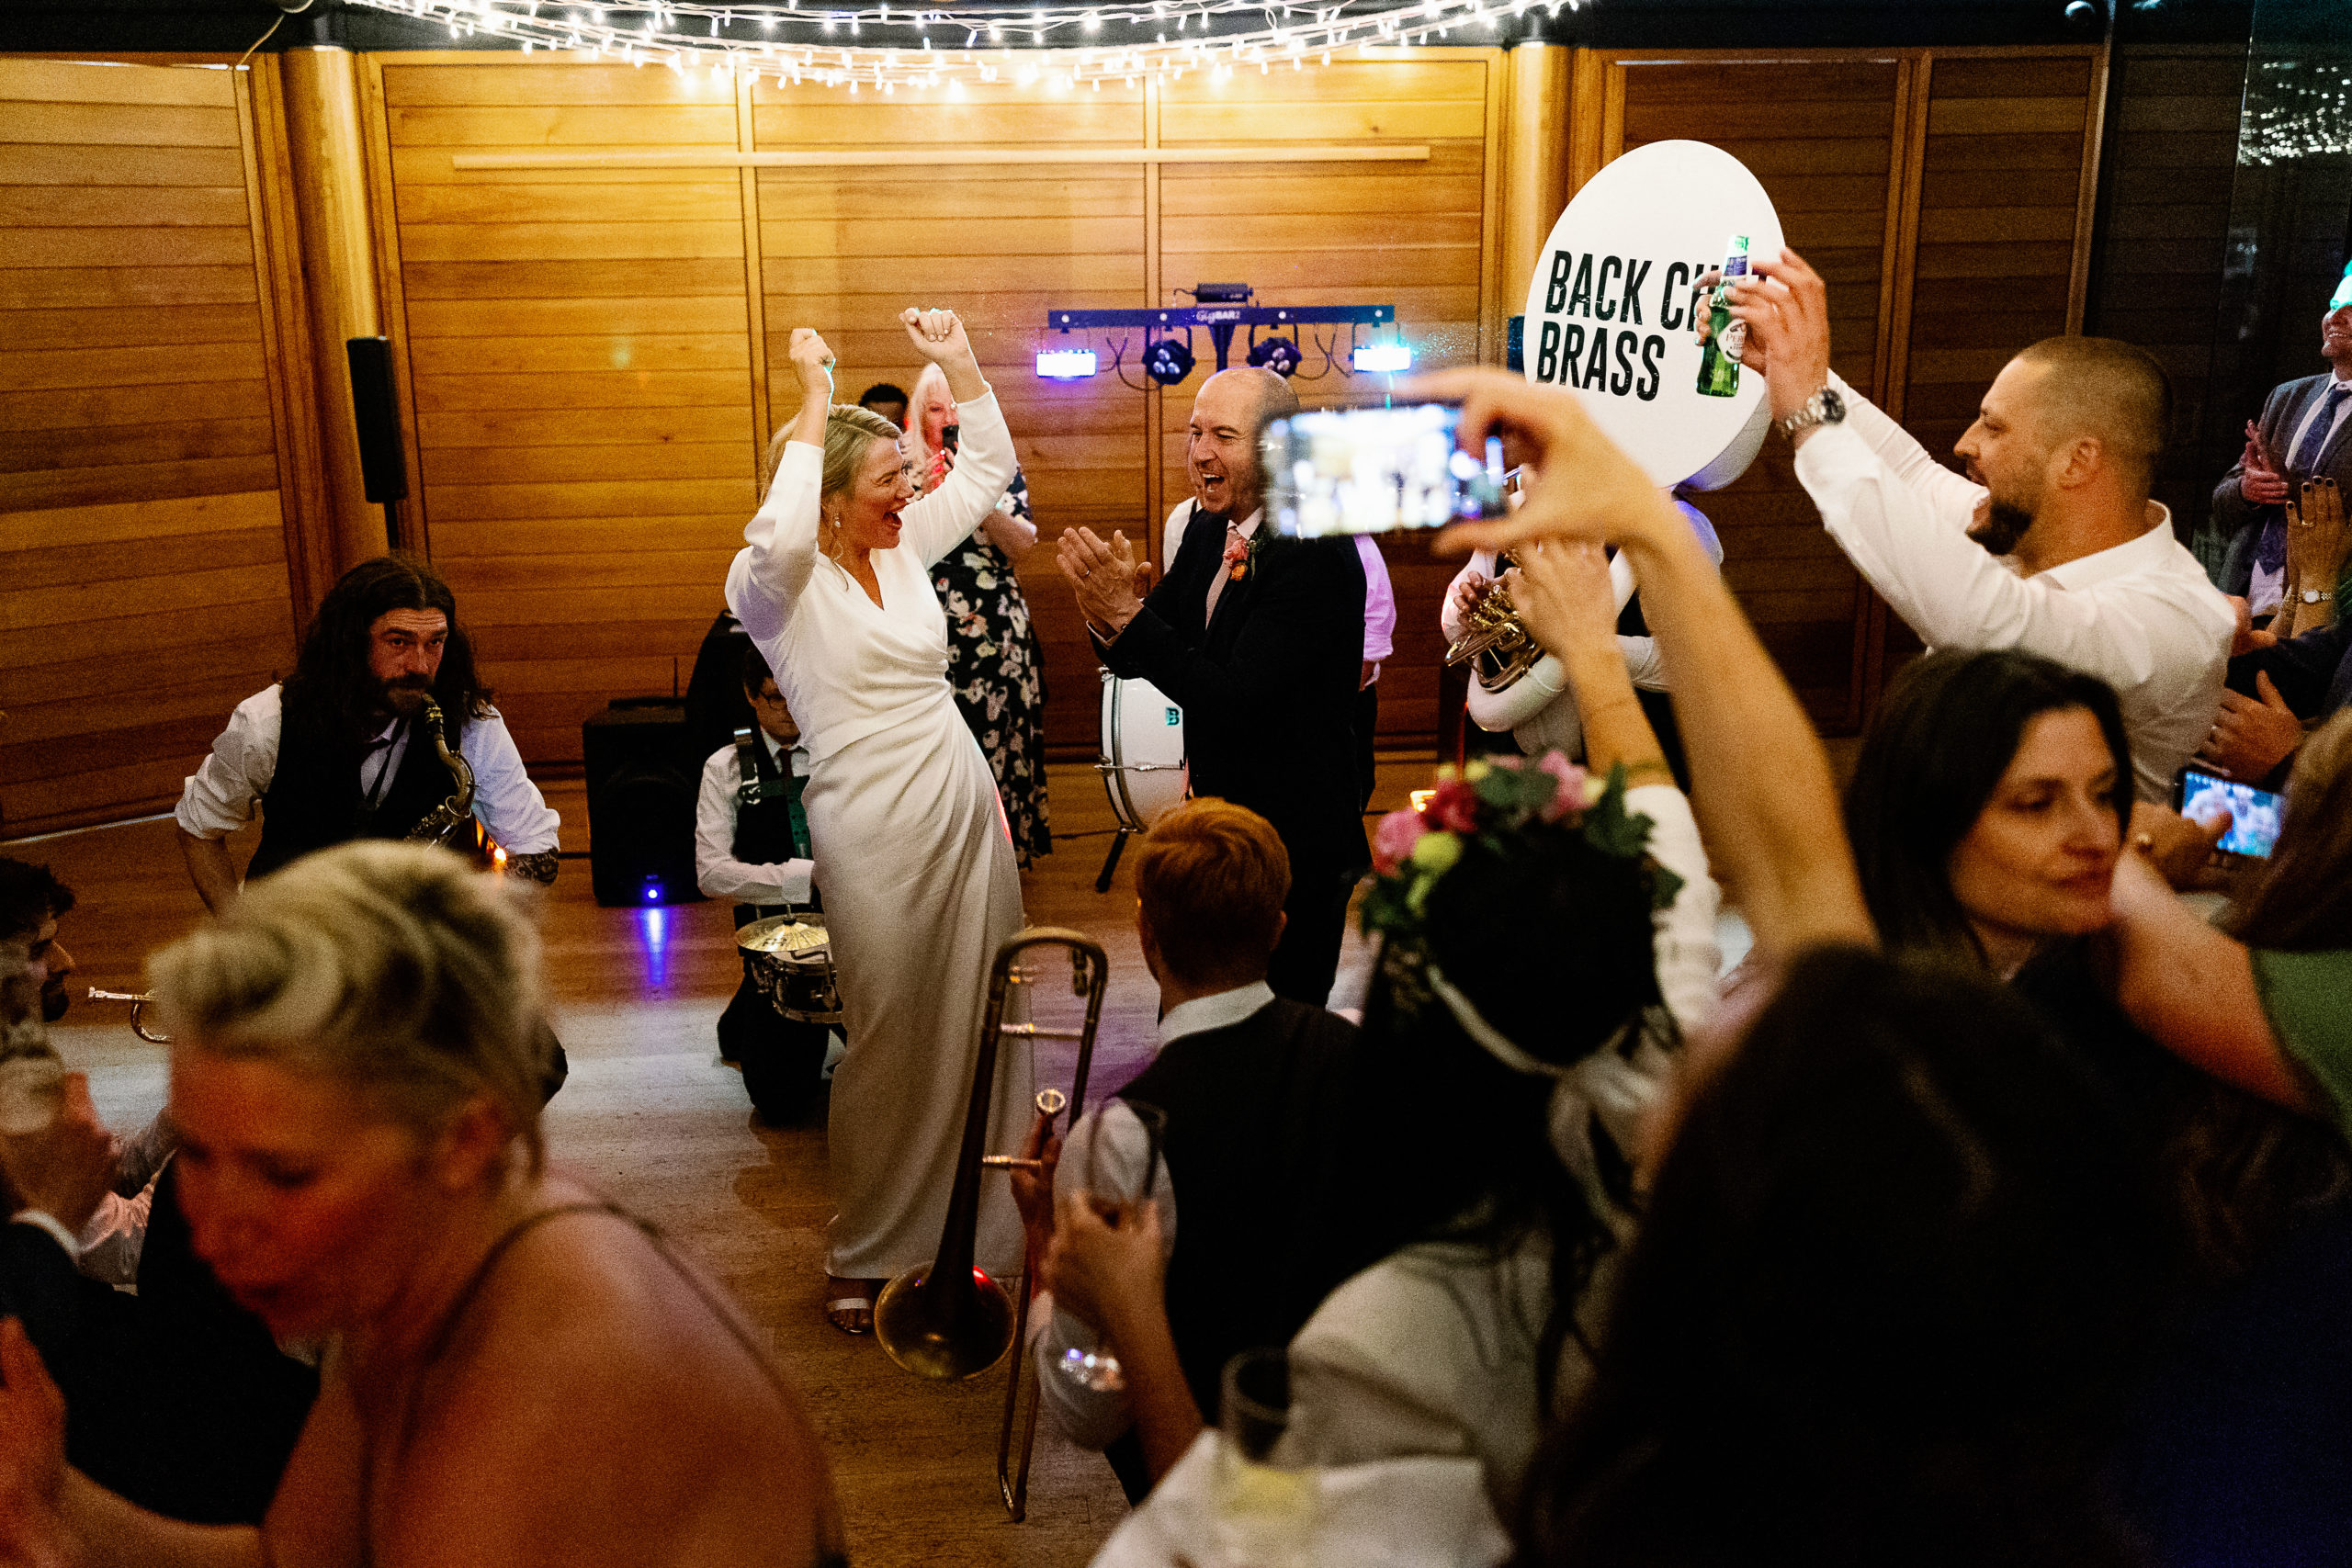 Bride and groom dancing to back chat brass